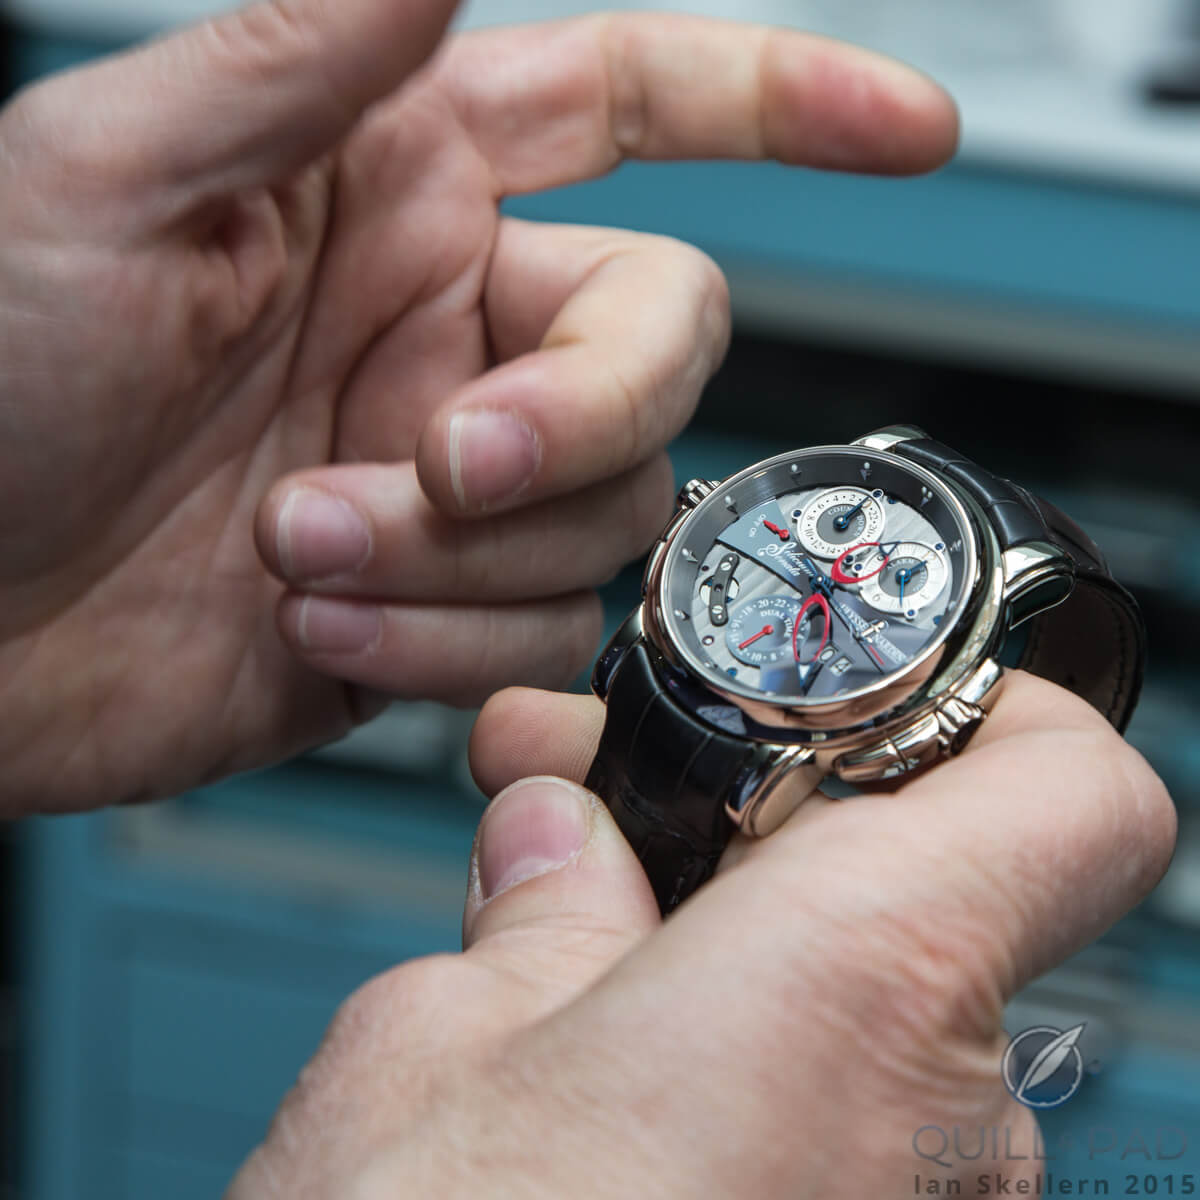 Mo Coppoletta explaining what makes this Ulysse Nardin Sonata so special to him